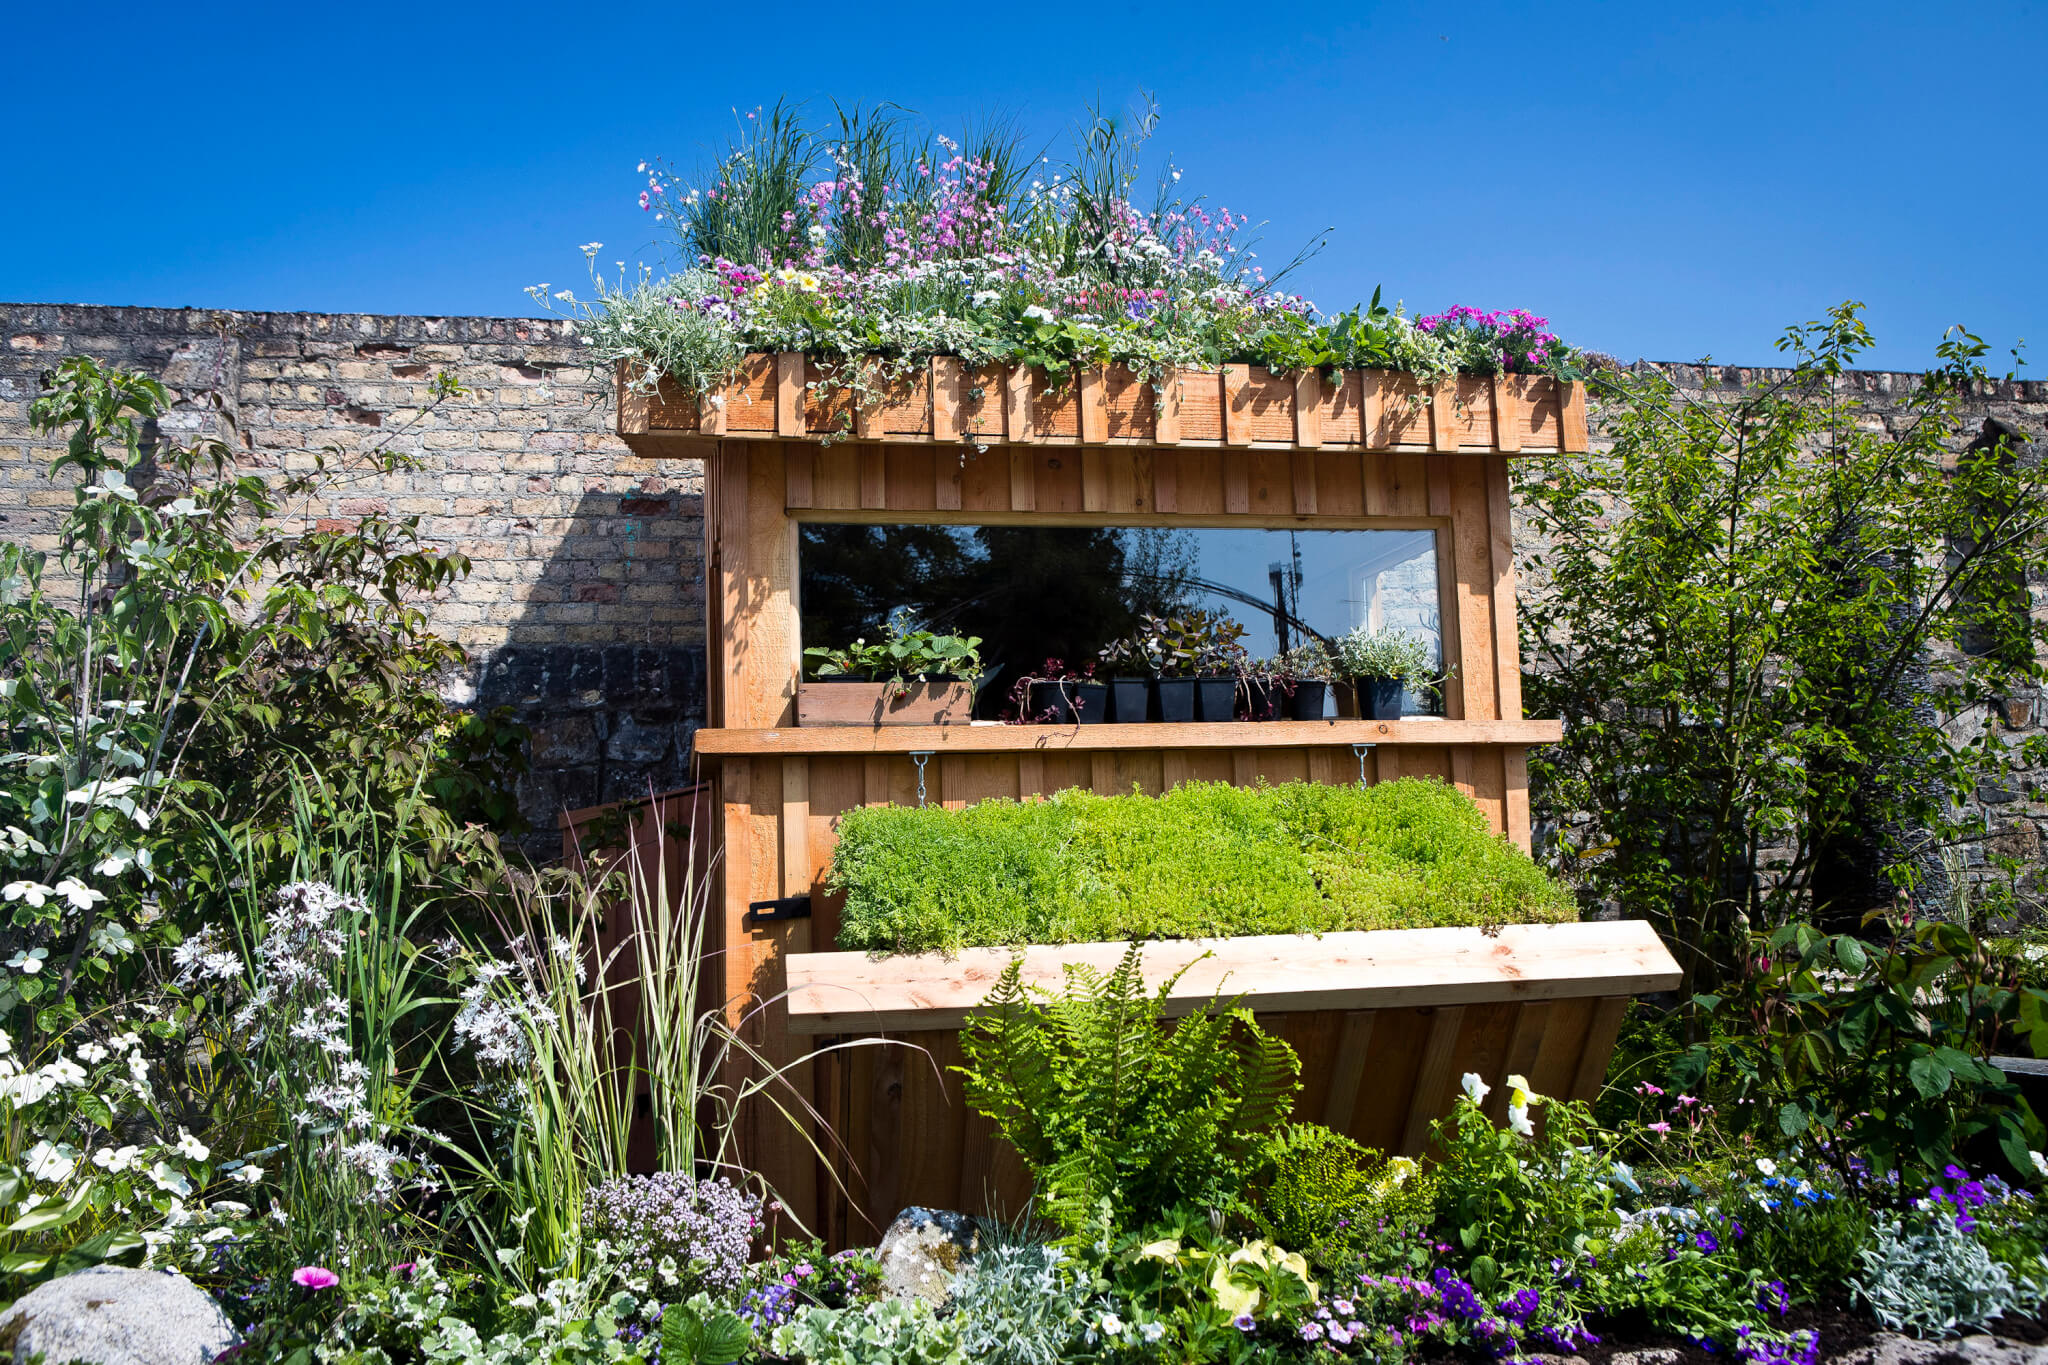 Growing Shed Garden designed by Melanie Webb. Photo: Iain White - Fennell Photography.